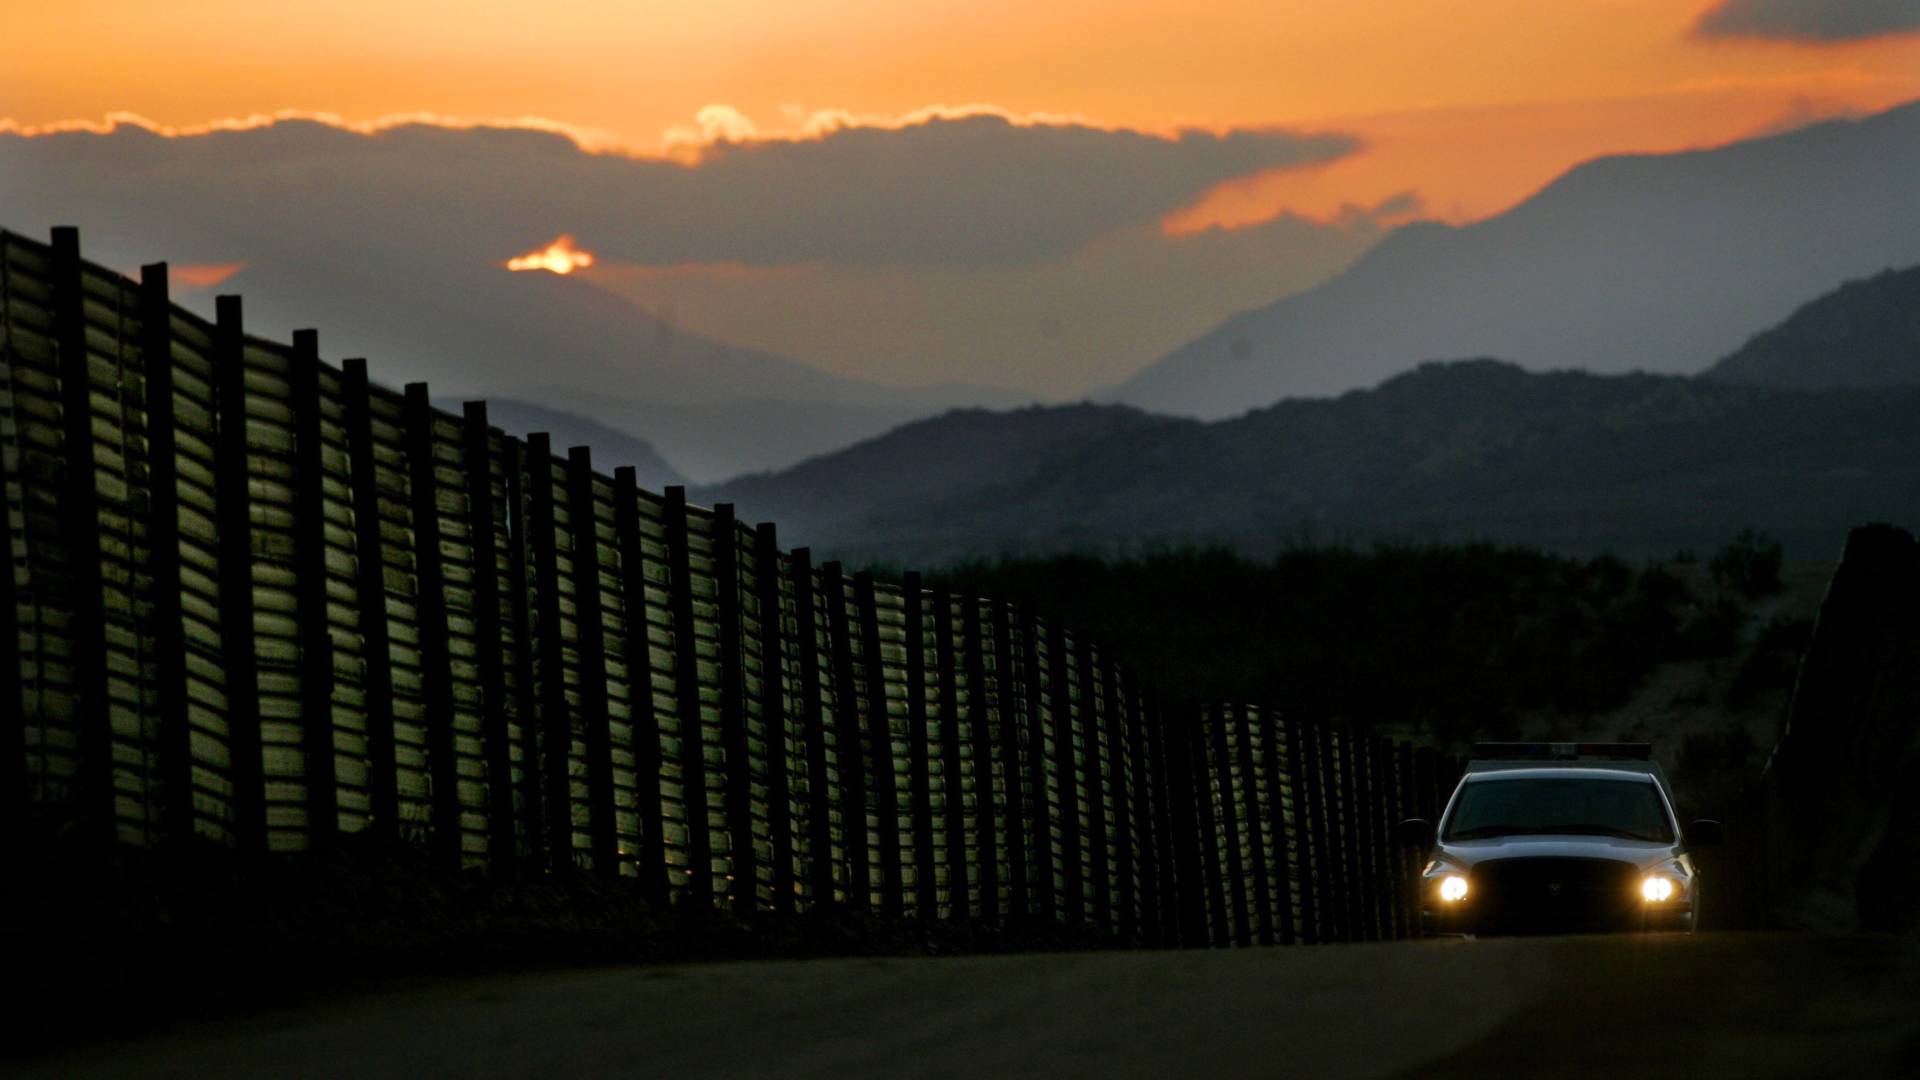 A Border Patrol vehicle rides beside an already existing portion of the wall along the U.S.-Mexico border south of San Diego. Sandy Huffaker/Getty Images